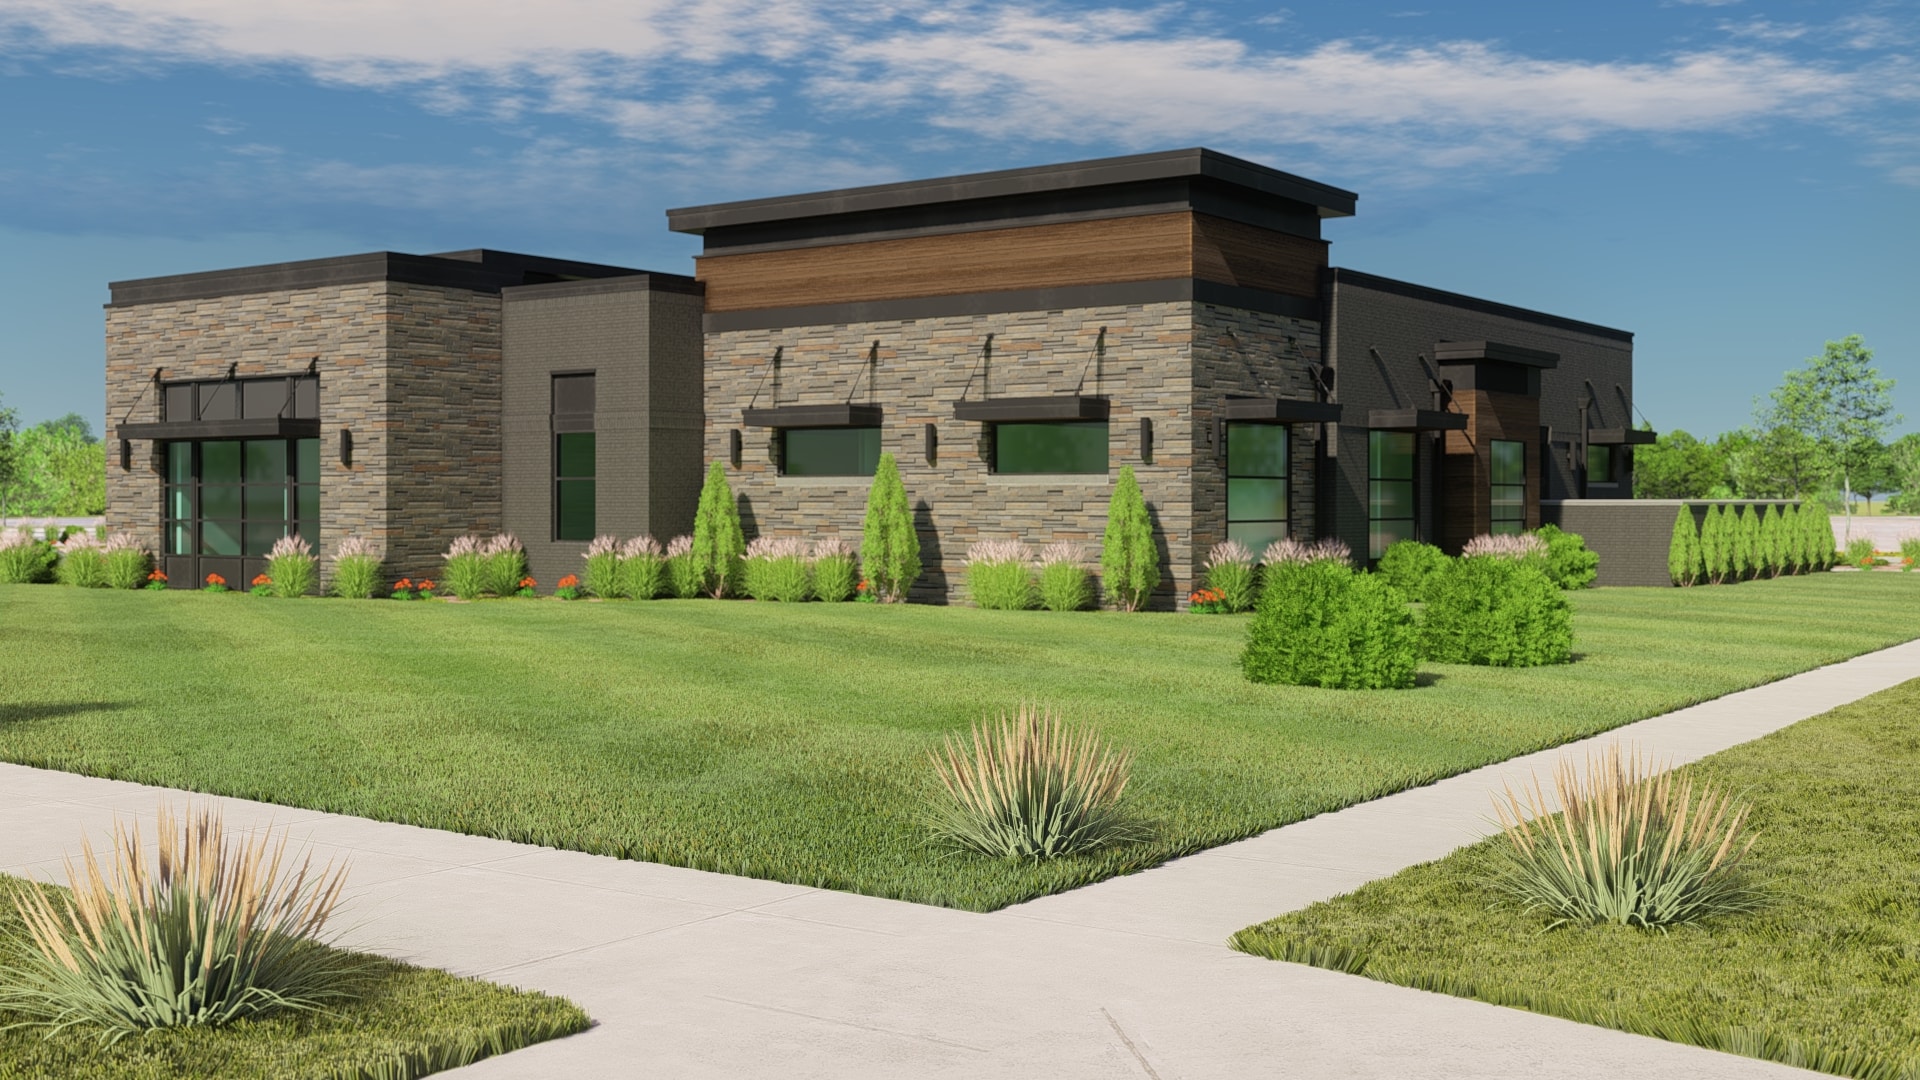 Liberty Animal Hospital new building outside view